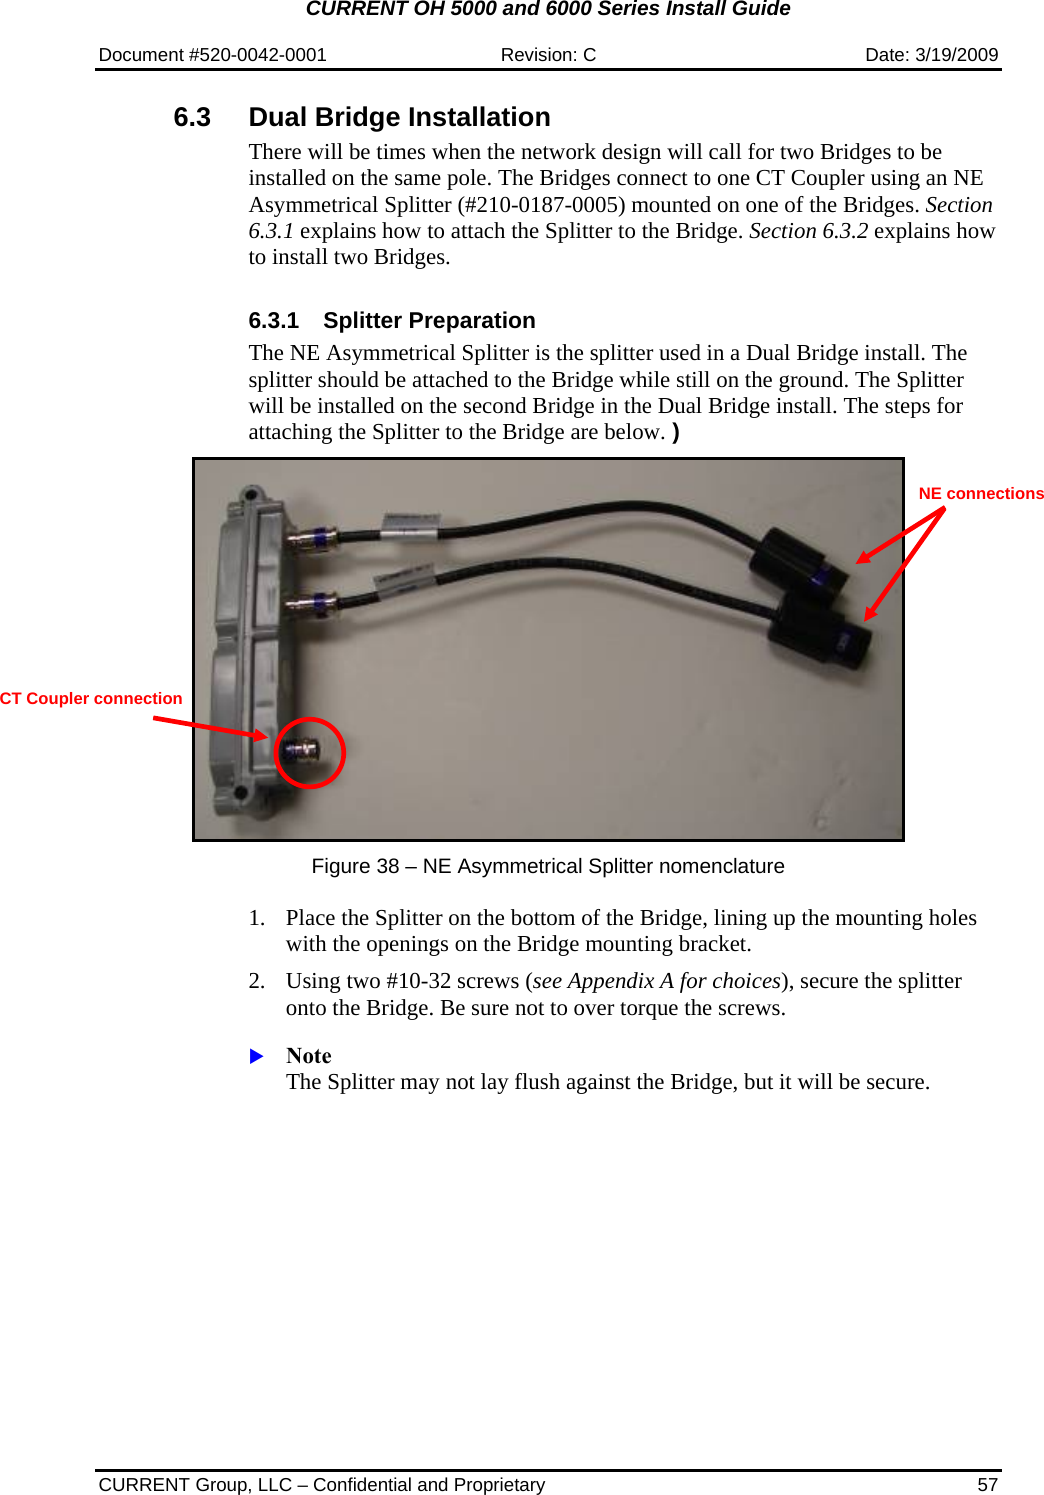 CURRENT OH 5000 and 6000 Series Install Guide  Document #520-0042-0001  Revision: C  Date: 3/19/2009  CURRENT Group, LLC – Confidential and Proprietary  57 6.3  Dual Bridge Installation There will be times when the network design will call for two Bridges to be installed on the same pole. The Bridges connect to one CT Coupler using an NE Asymmetrical Splitter (#210-0187-0005) mounted on one of the Bridges. Section 6.3.1 explains how to attach the Splitter to the Bridge. Section 6.3.2 explains how to install two Bridges.  6.3.1  Splitter Preparation  The NE Asymmetrical Splitter is the splitter used in a Dual Bridge install. The splitter should be attached to the Bridge while still on the ground. The Splitter will be installed on the second Bridge in the Dual Bridge install. The steps for attaching the Splitter to the Bridge are below. )    Figure 38 – NE Asymmetrical Splitter nomenclature  1. Place the Splitter on the bottom of the Bridge, lining up the mounting holes with the openings on the Bridge mounting bracket. 2. Using two #10-32 screws (see Appendix A for choices), secure the splitter onto the Bridge. Be sure not to over torque the screws.  X Note  The Splitter may not lay flush against the Bridge, but it will be secure. CT Coupler connection NE connections 